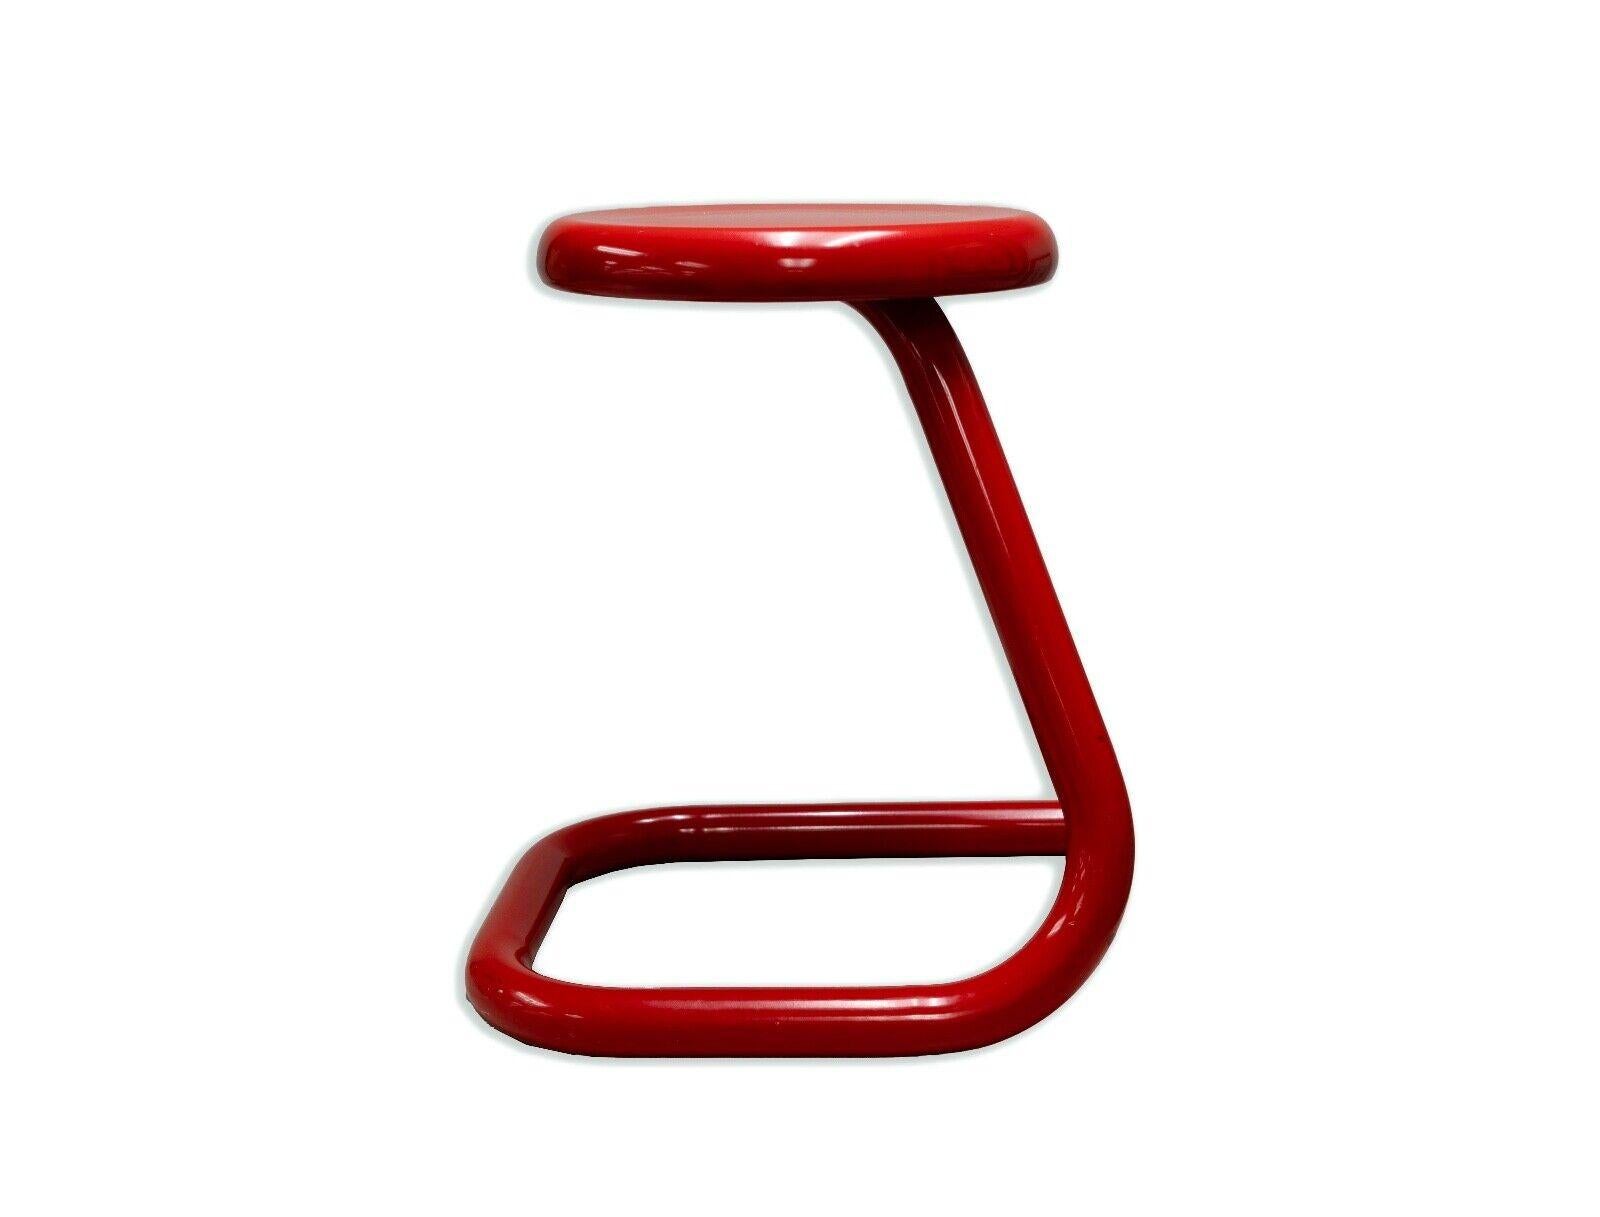 The Kinetics Red Paperclip Stool is a bold statement piece that embodies the essence of contemporary modern design. Made in Canada, this stool boasts a vibrant red finish on a sleek, continuous metal frame that takes inspiration from the playful